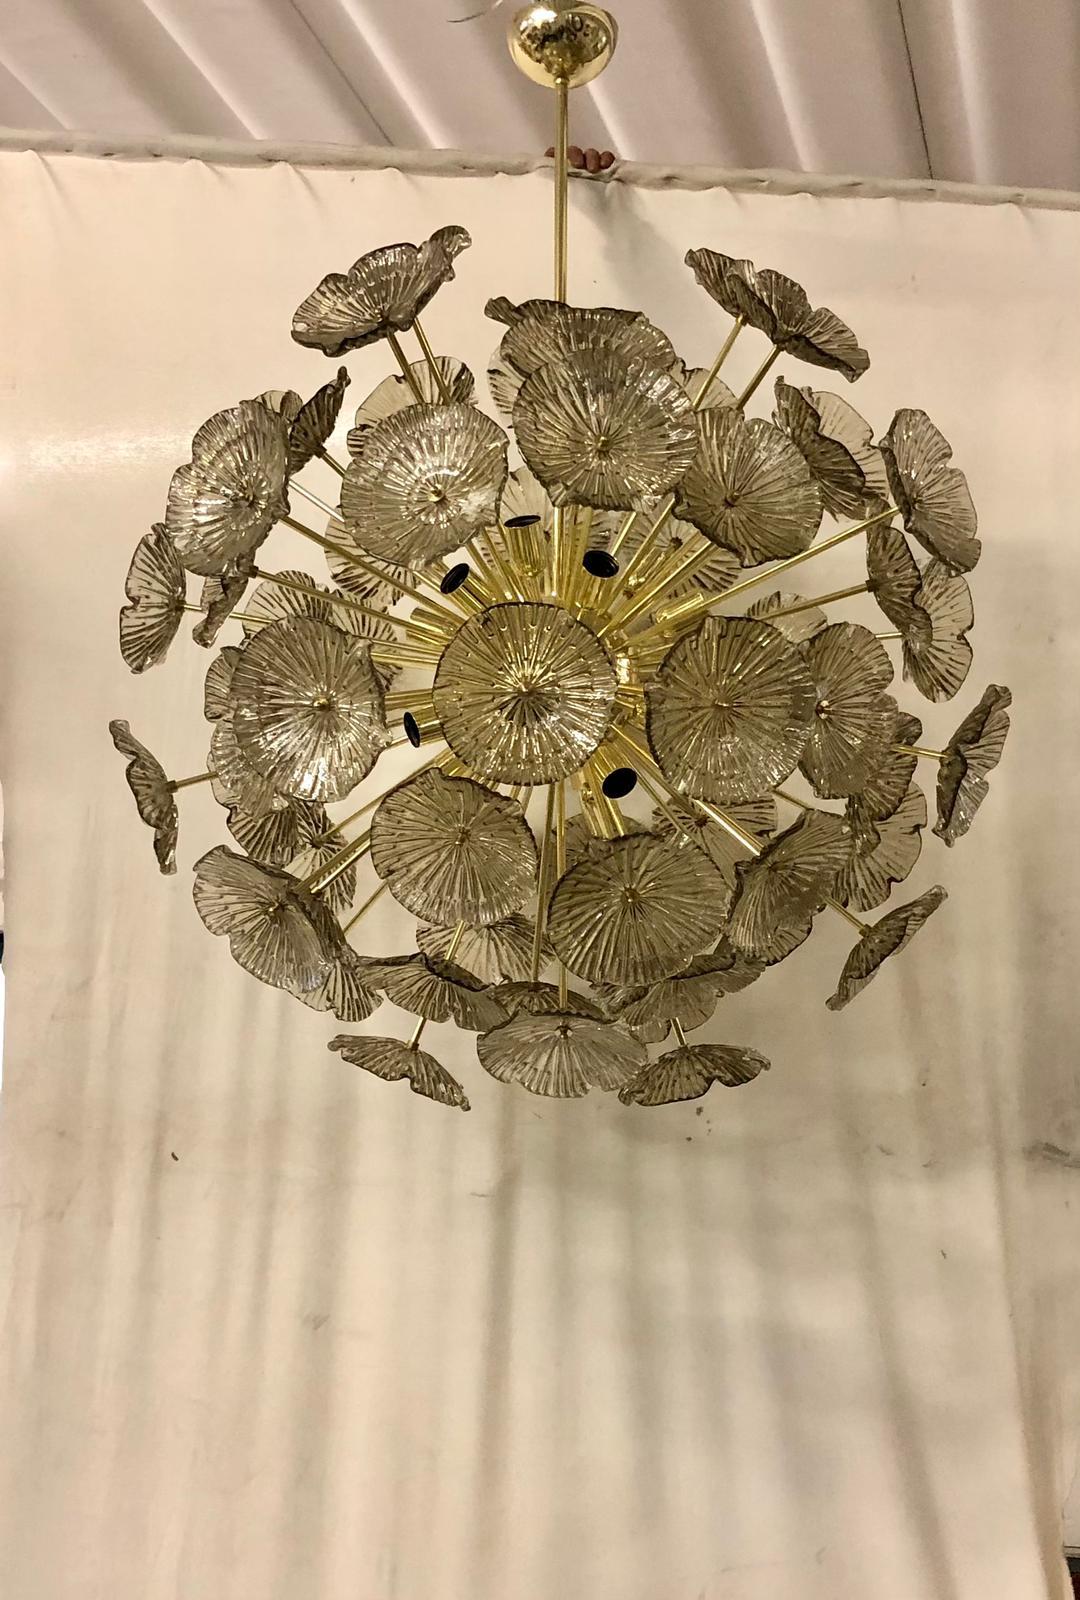 The large glass flowers make up this Murano chandelier from the 1970. A Classic Sputnik from the middle of the century. The Murano furnaces create an indisputable timeless design, simple but elegant at the same time.

Made of a large central sphere